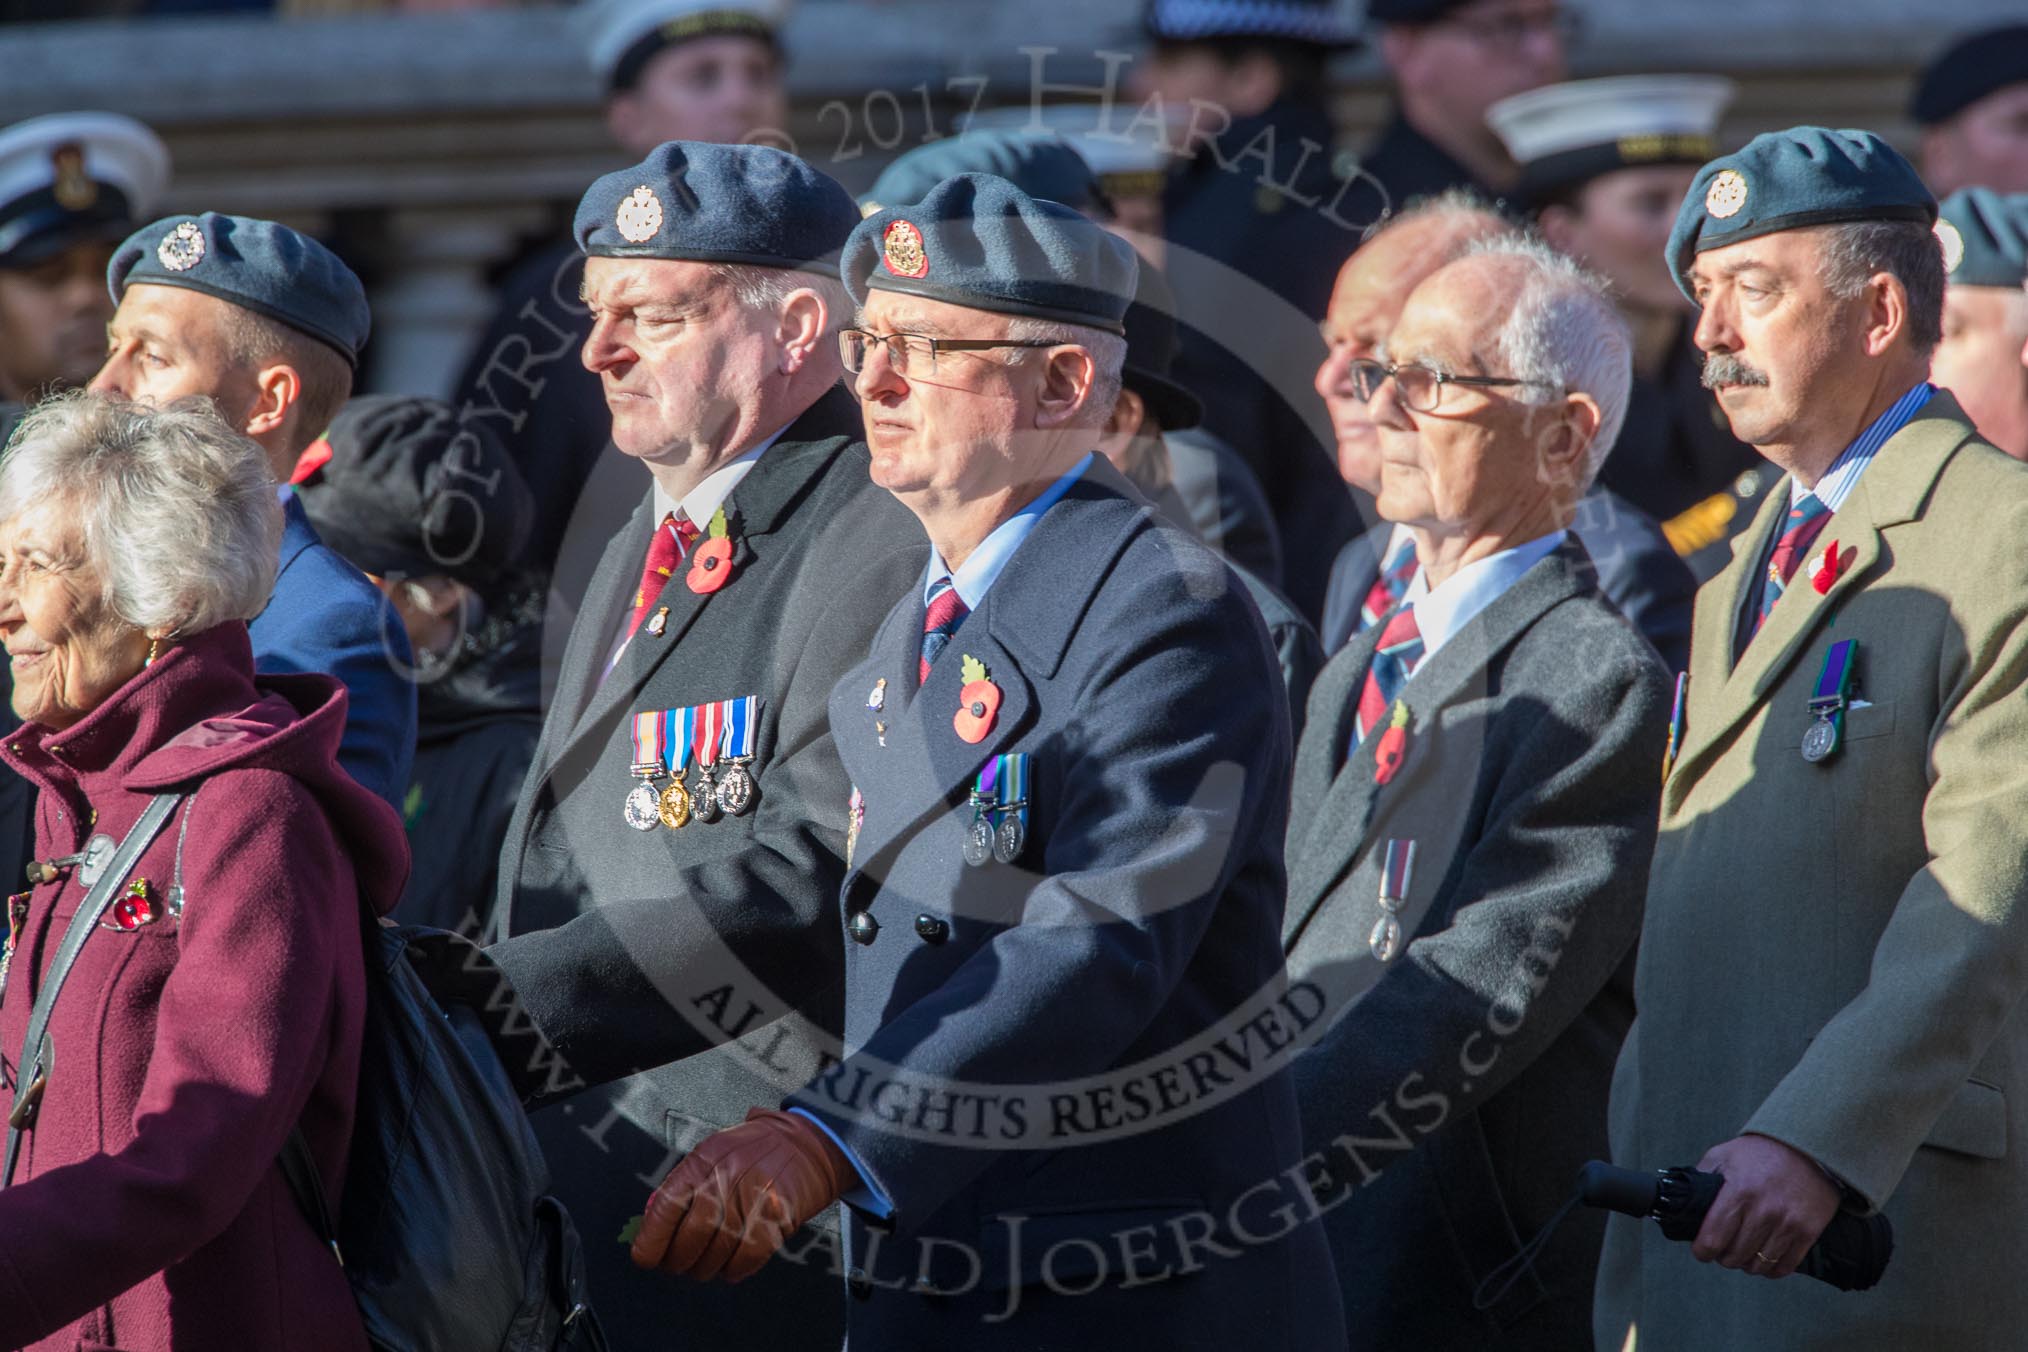 Royal Air Forces Association (Group C1, 155 members) during the Royal British Legion March Past on Remembrance Sunday at the Cenotaph, Whitehall, Westminster, London, 11 November 2018, 12:14.